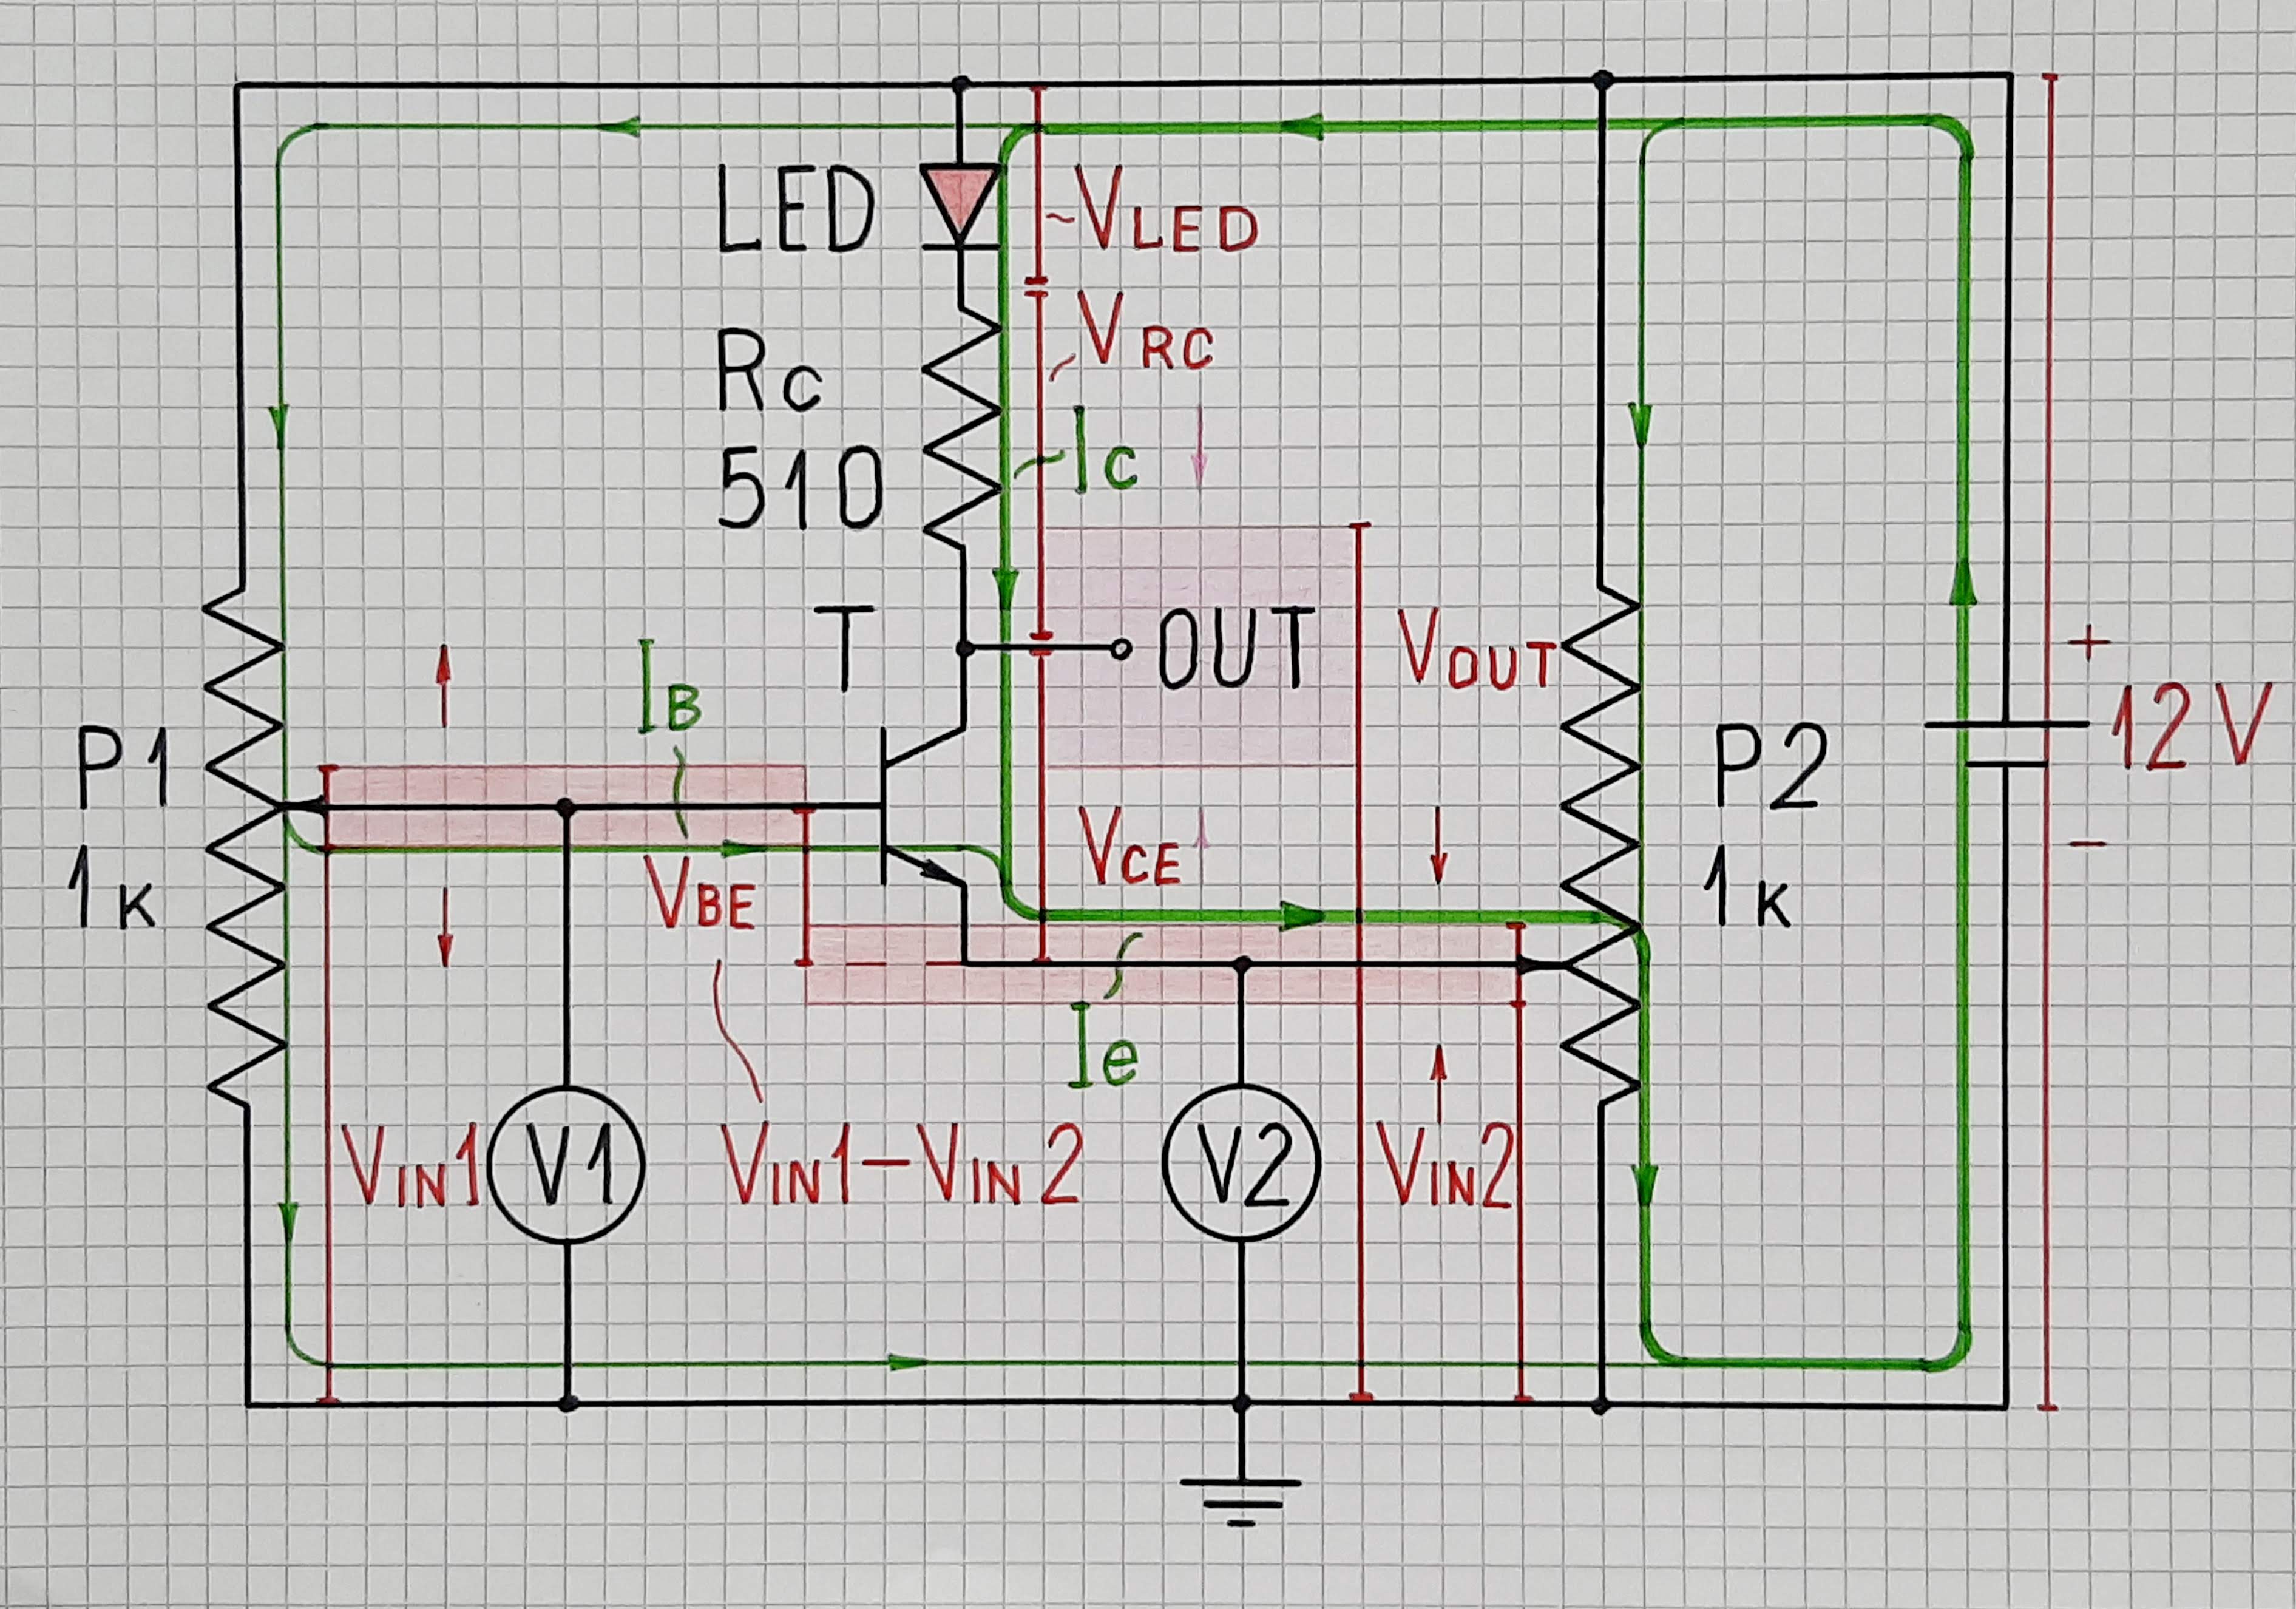 Investigating a transistor stage by applying both base and emitter inpout voltages (differential mode)